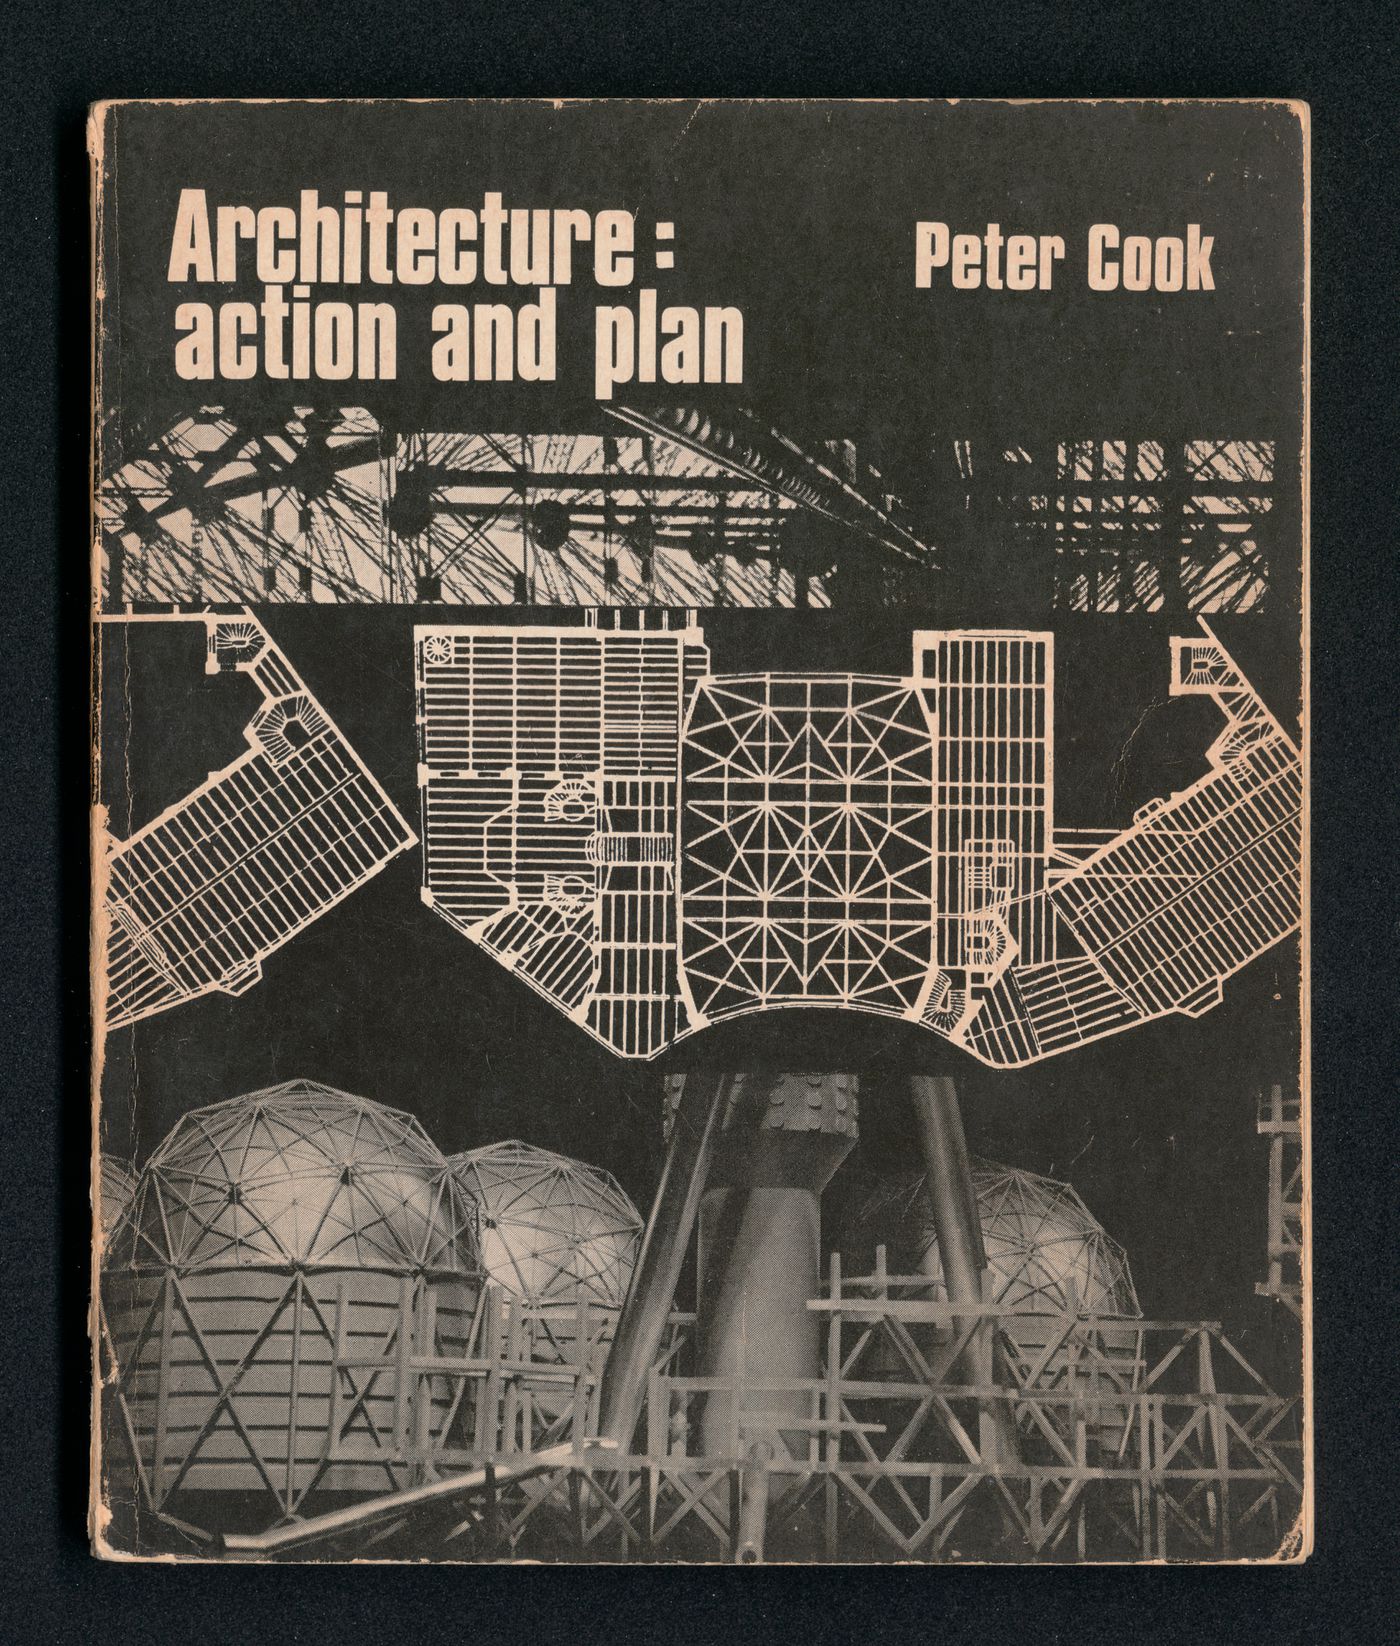 Book entitled "Architecture: action and plan"